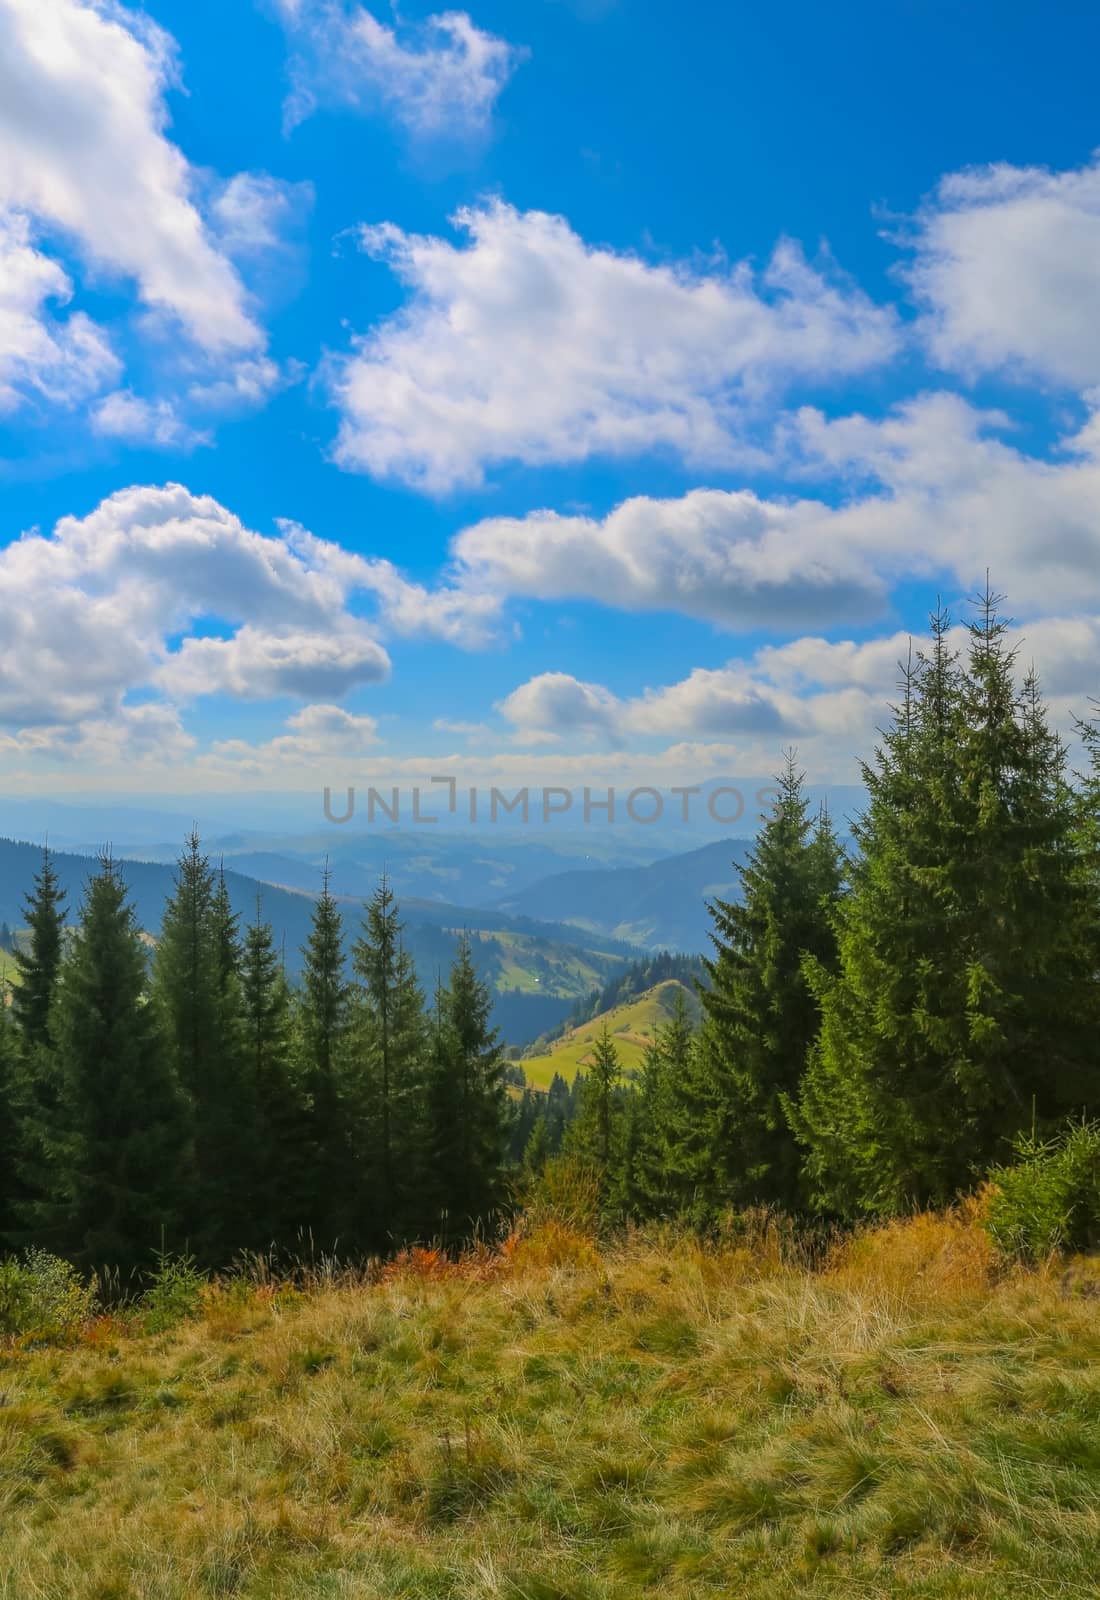 Green fir trees in the hills on a sunny day by Sid10